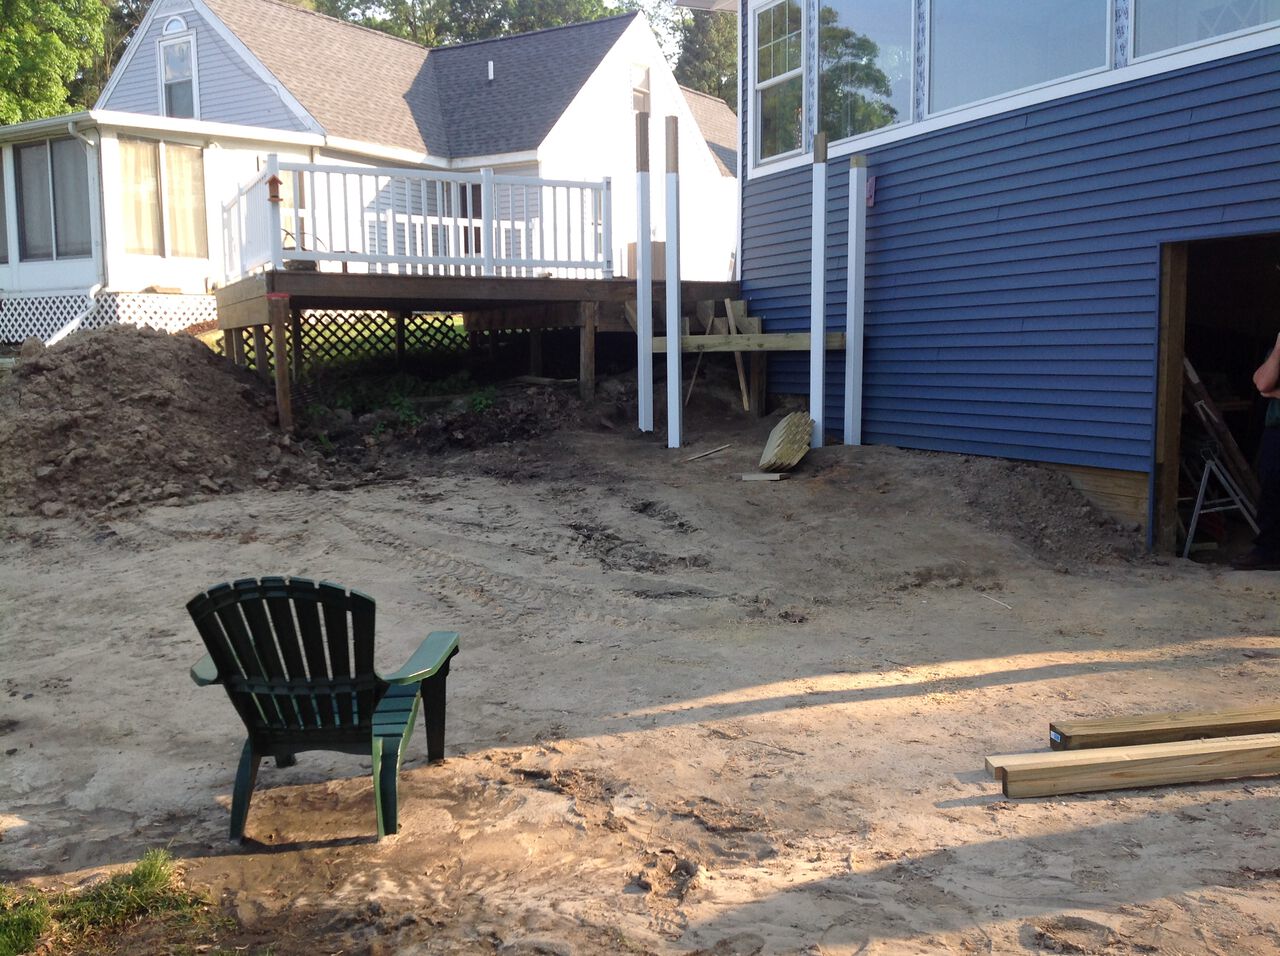 Richland Lakeside Outdoor Living Before Photo 2